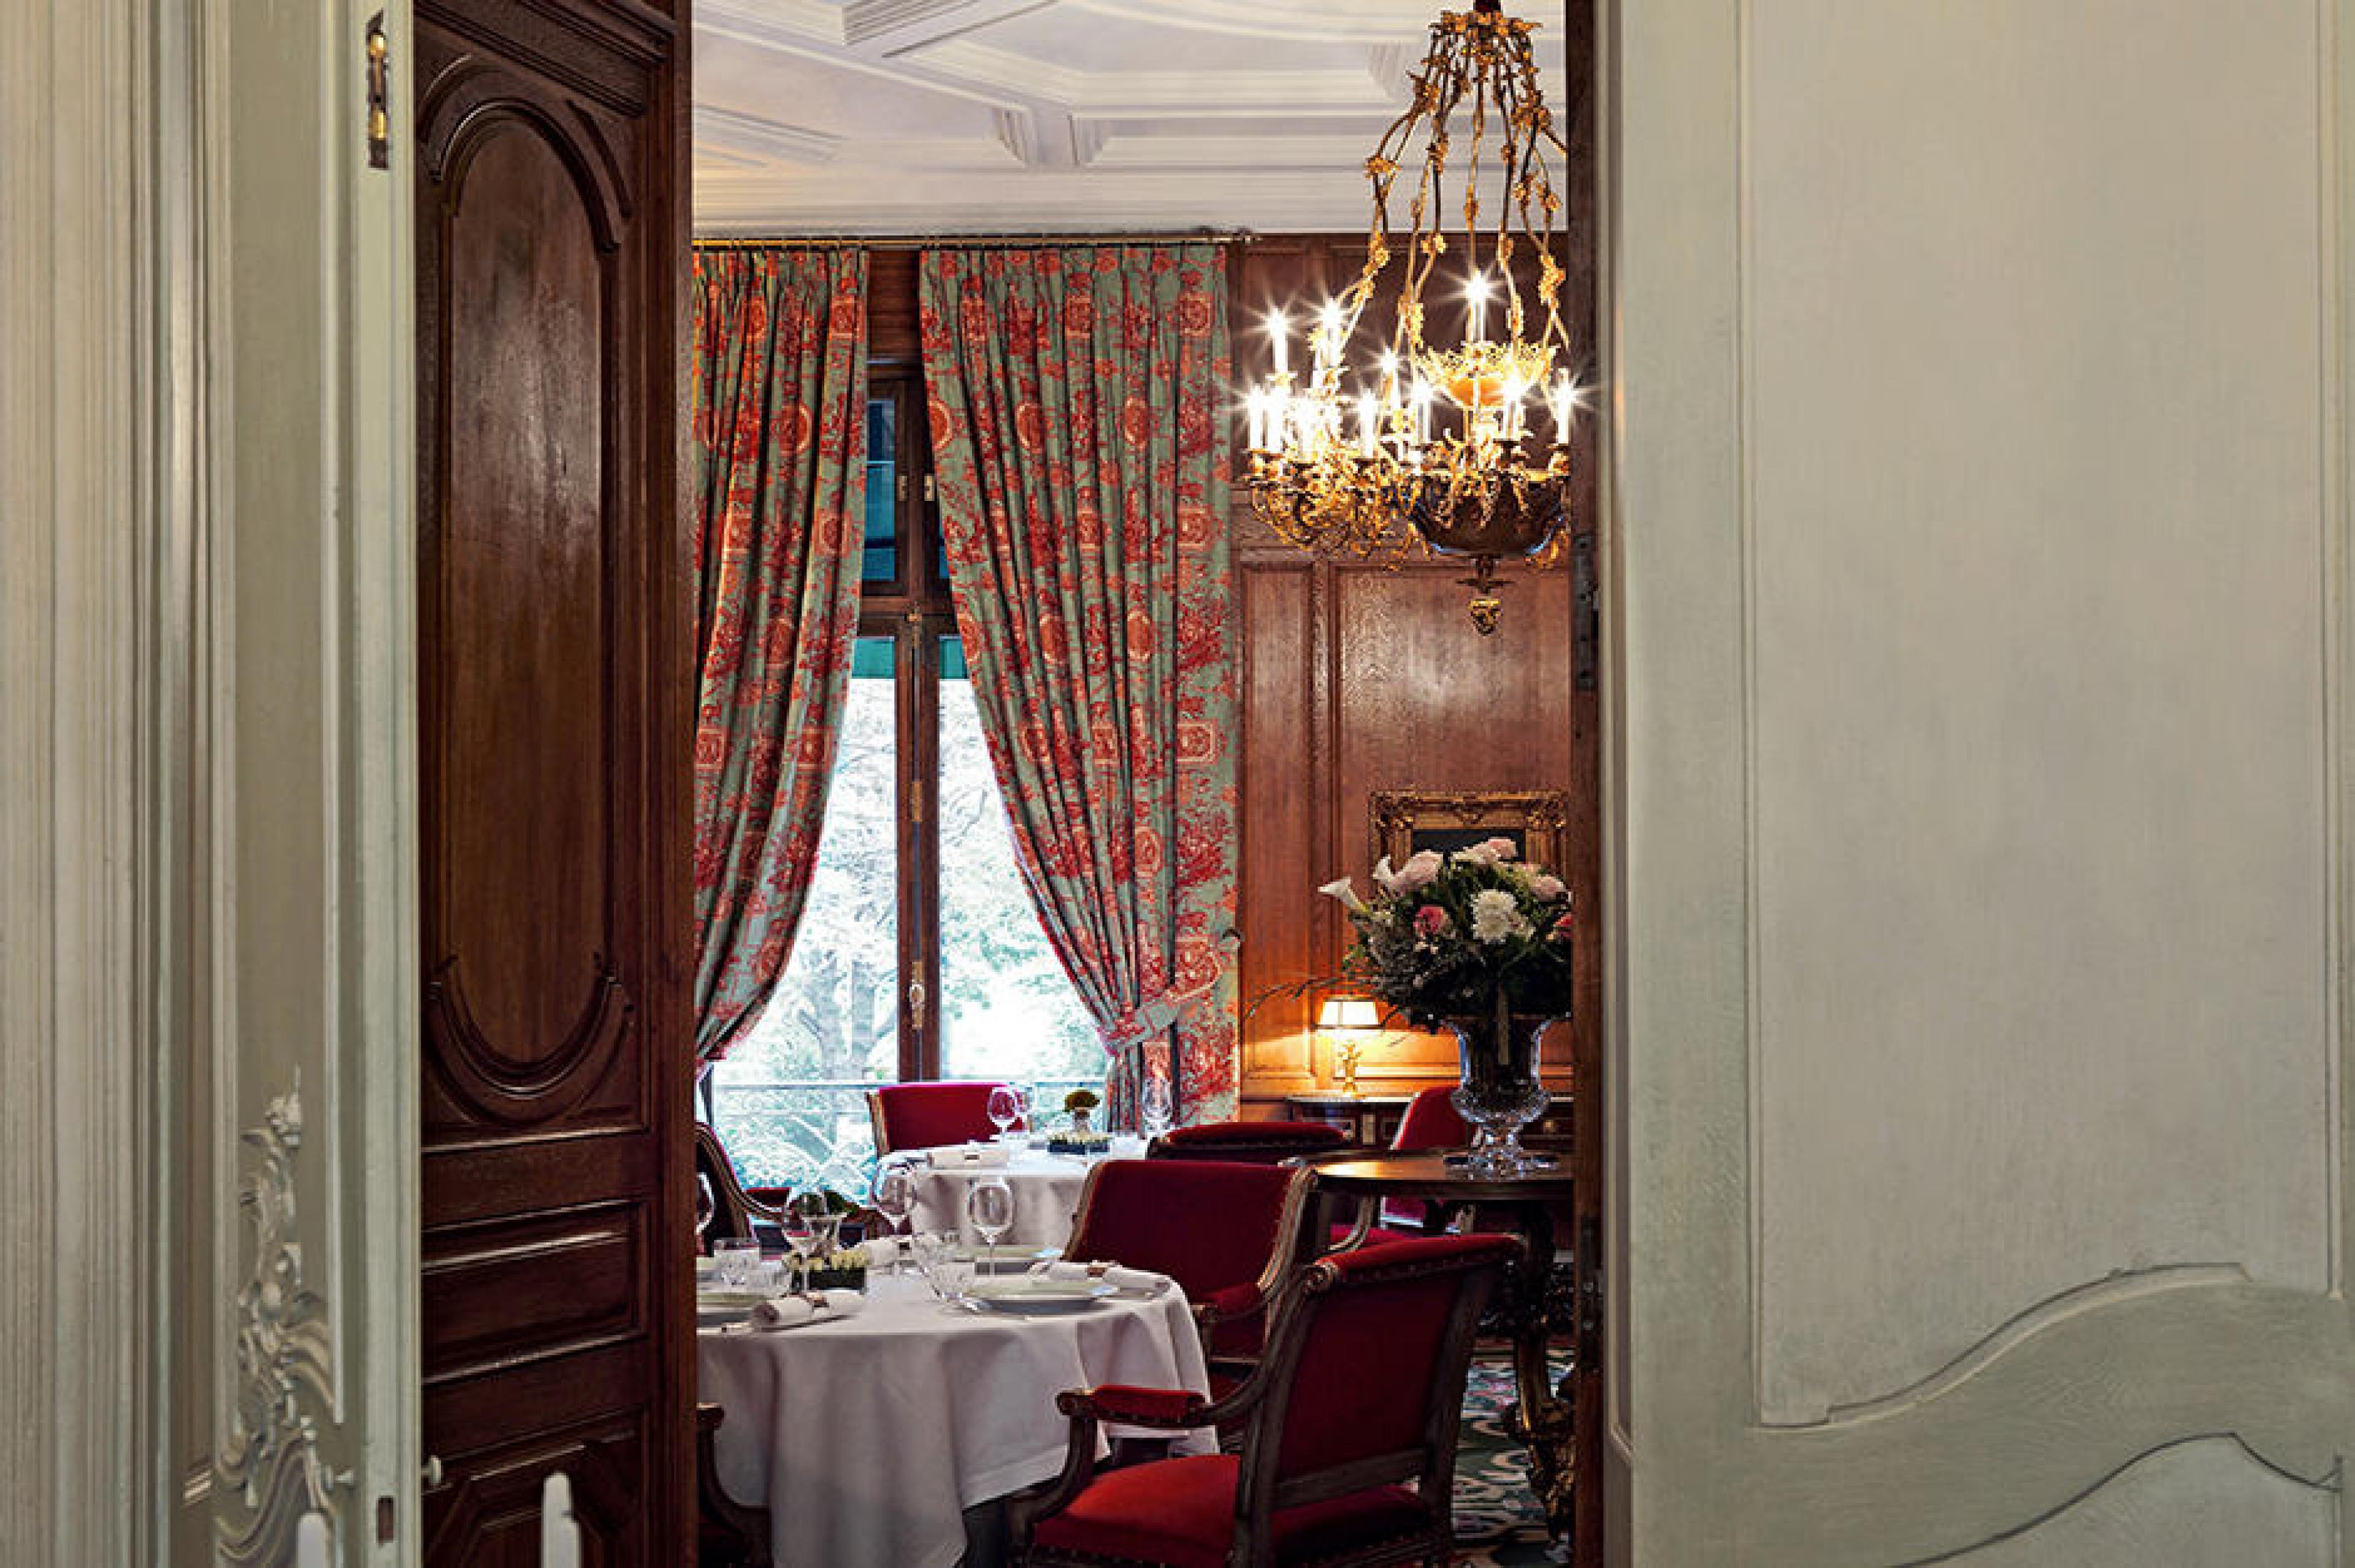 Dinning Area at Le Clarence, Paris, France